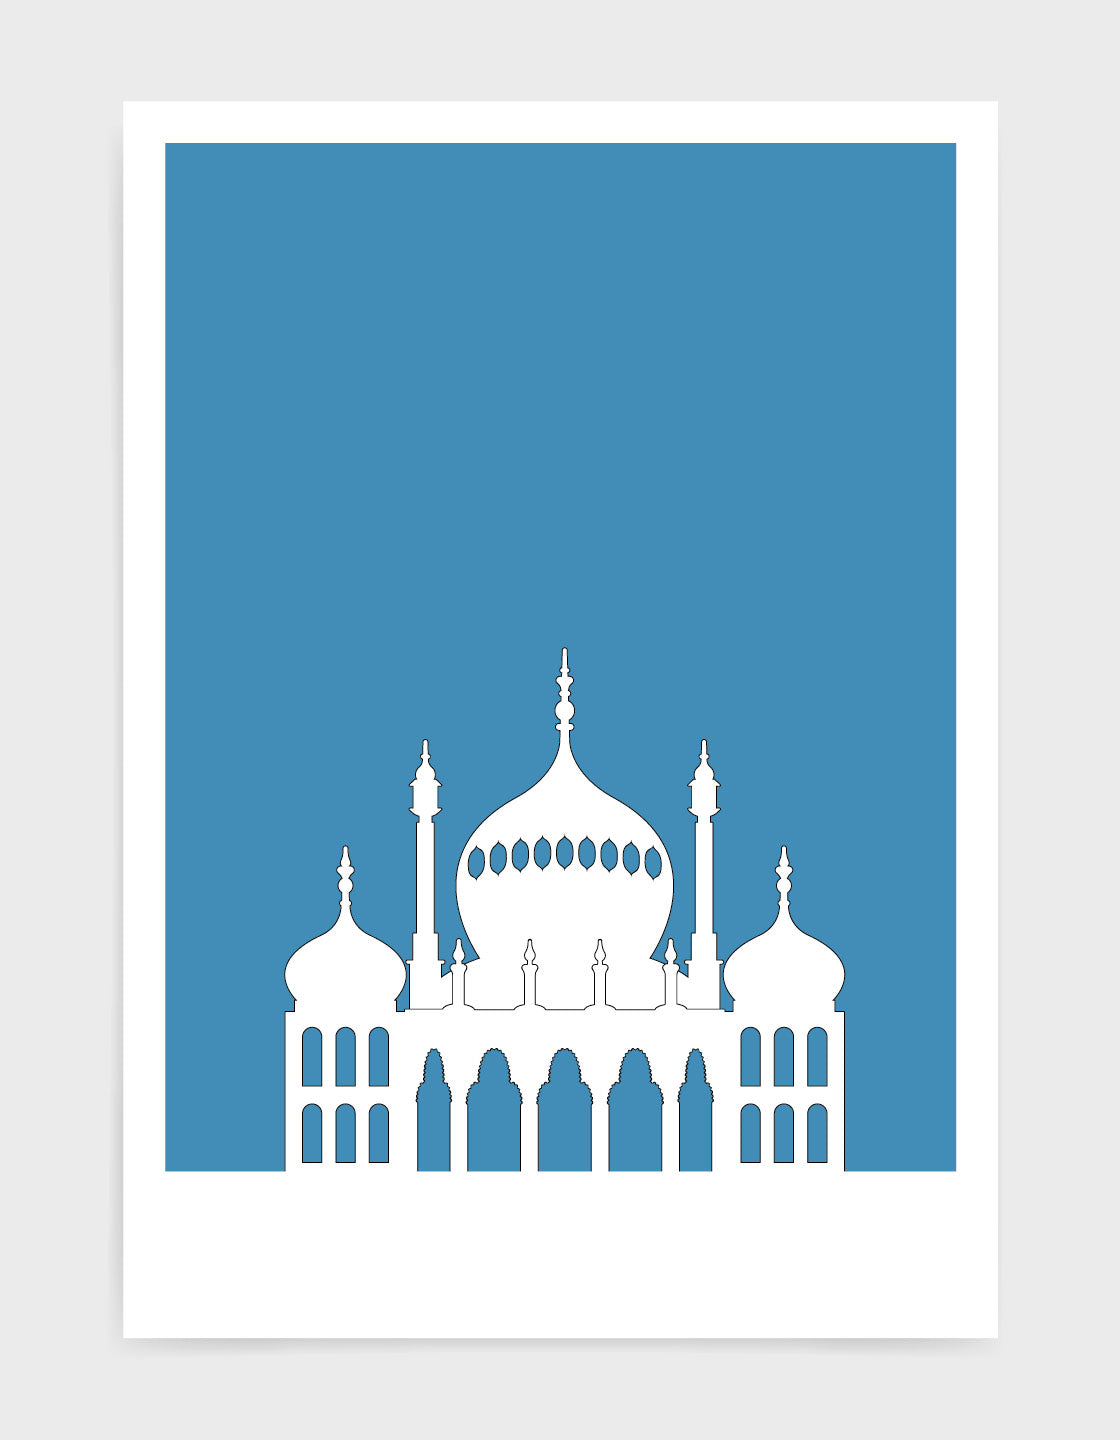 art print featuring Brighton Royal Pavilion in white against a mid blue background